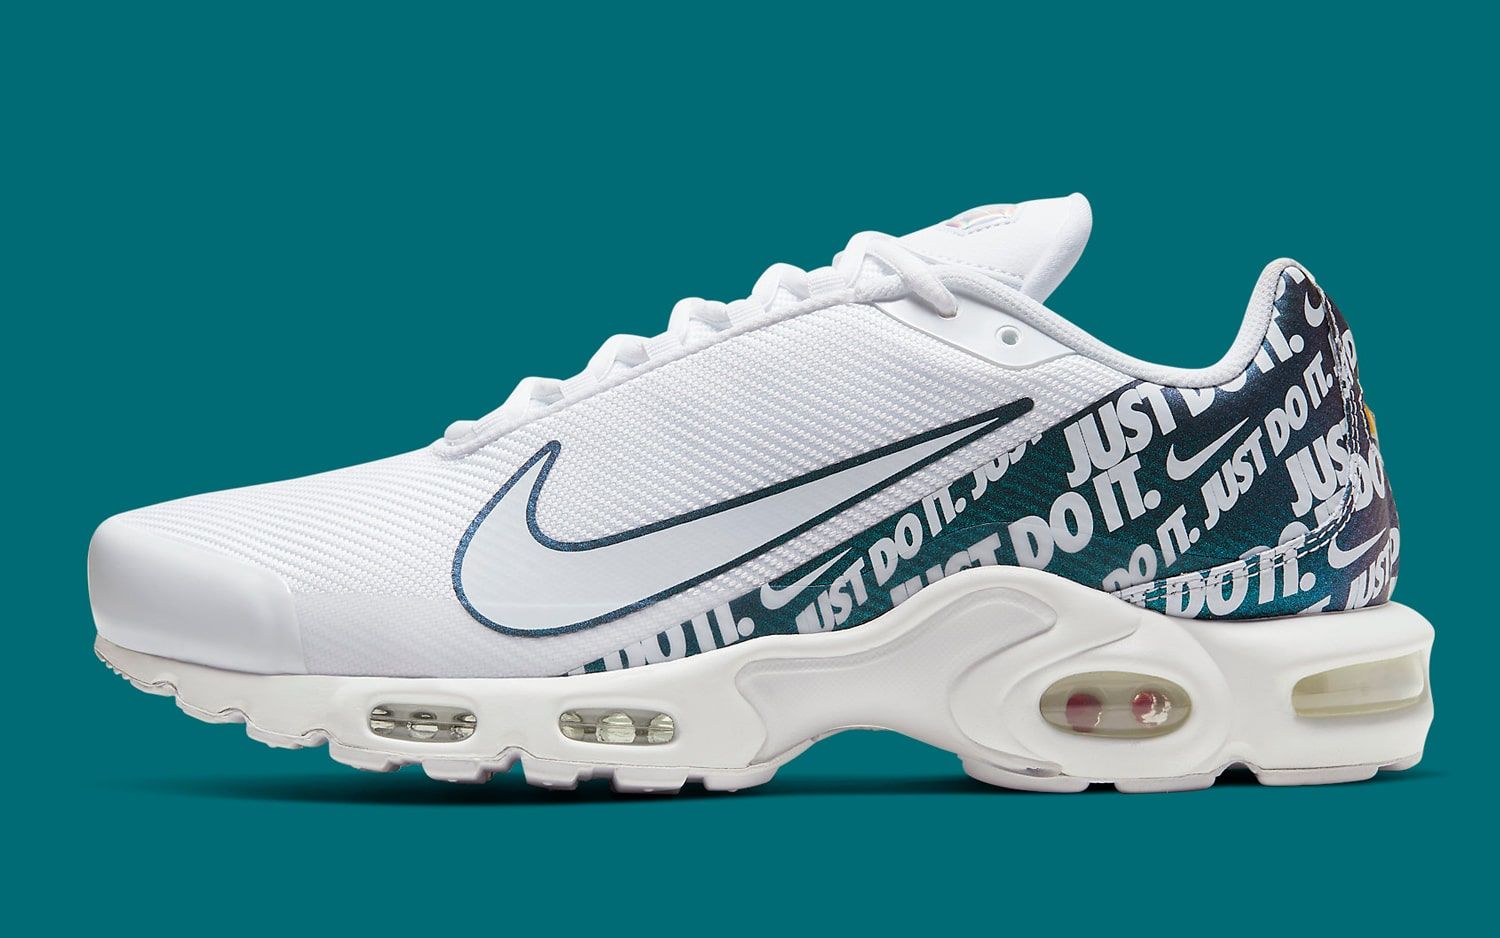 Returns on this White and Emerald Air Max Plus | House of Heat°